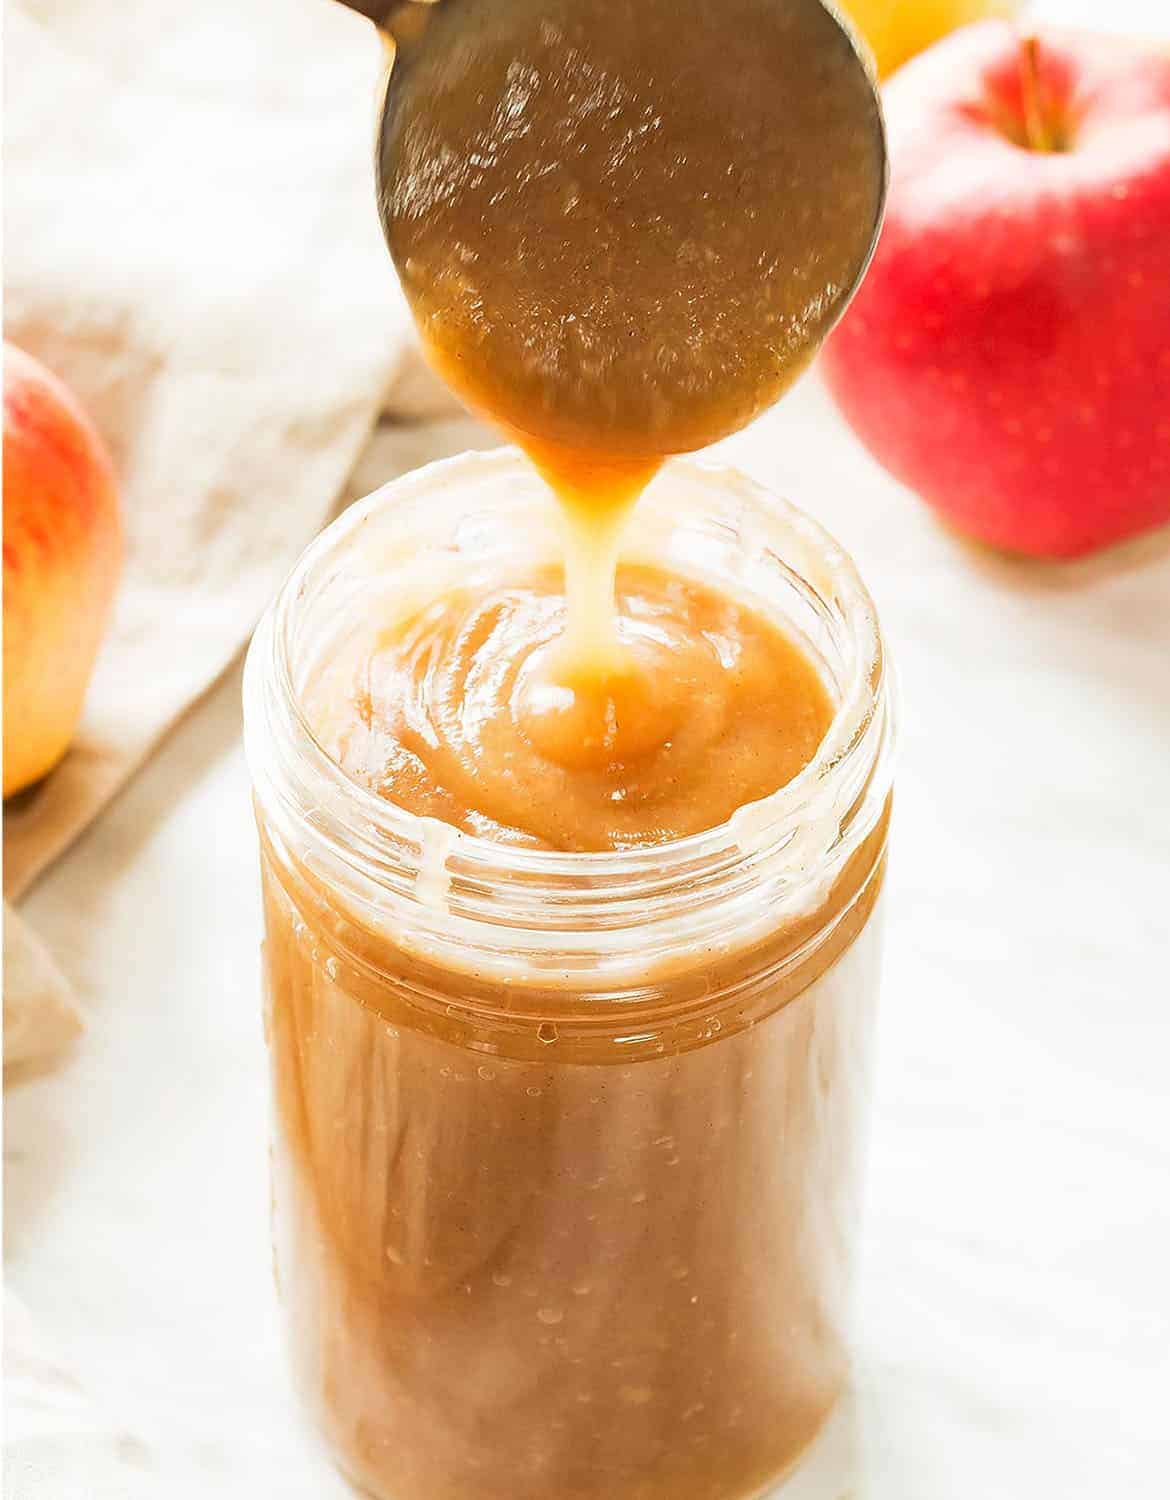 A spoon pouring apple sauce in a glass jar - Leelalicious